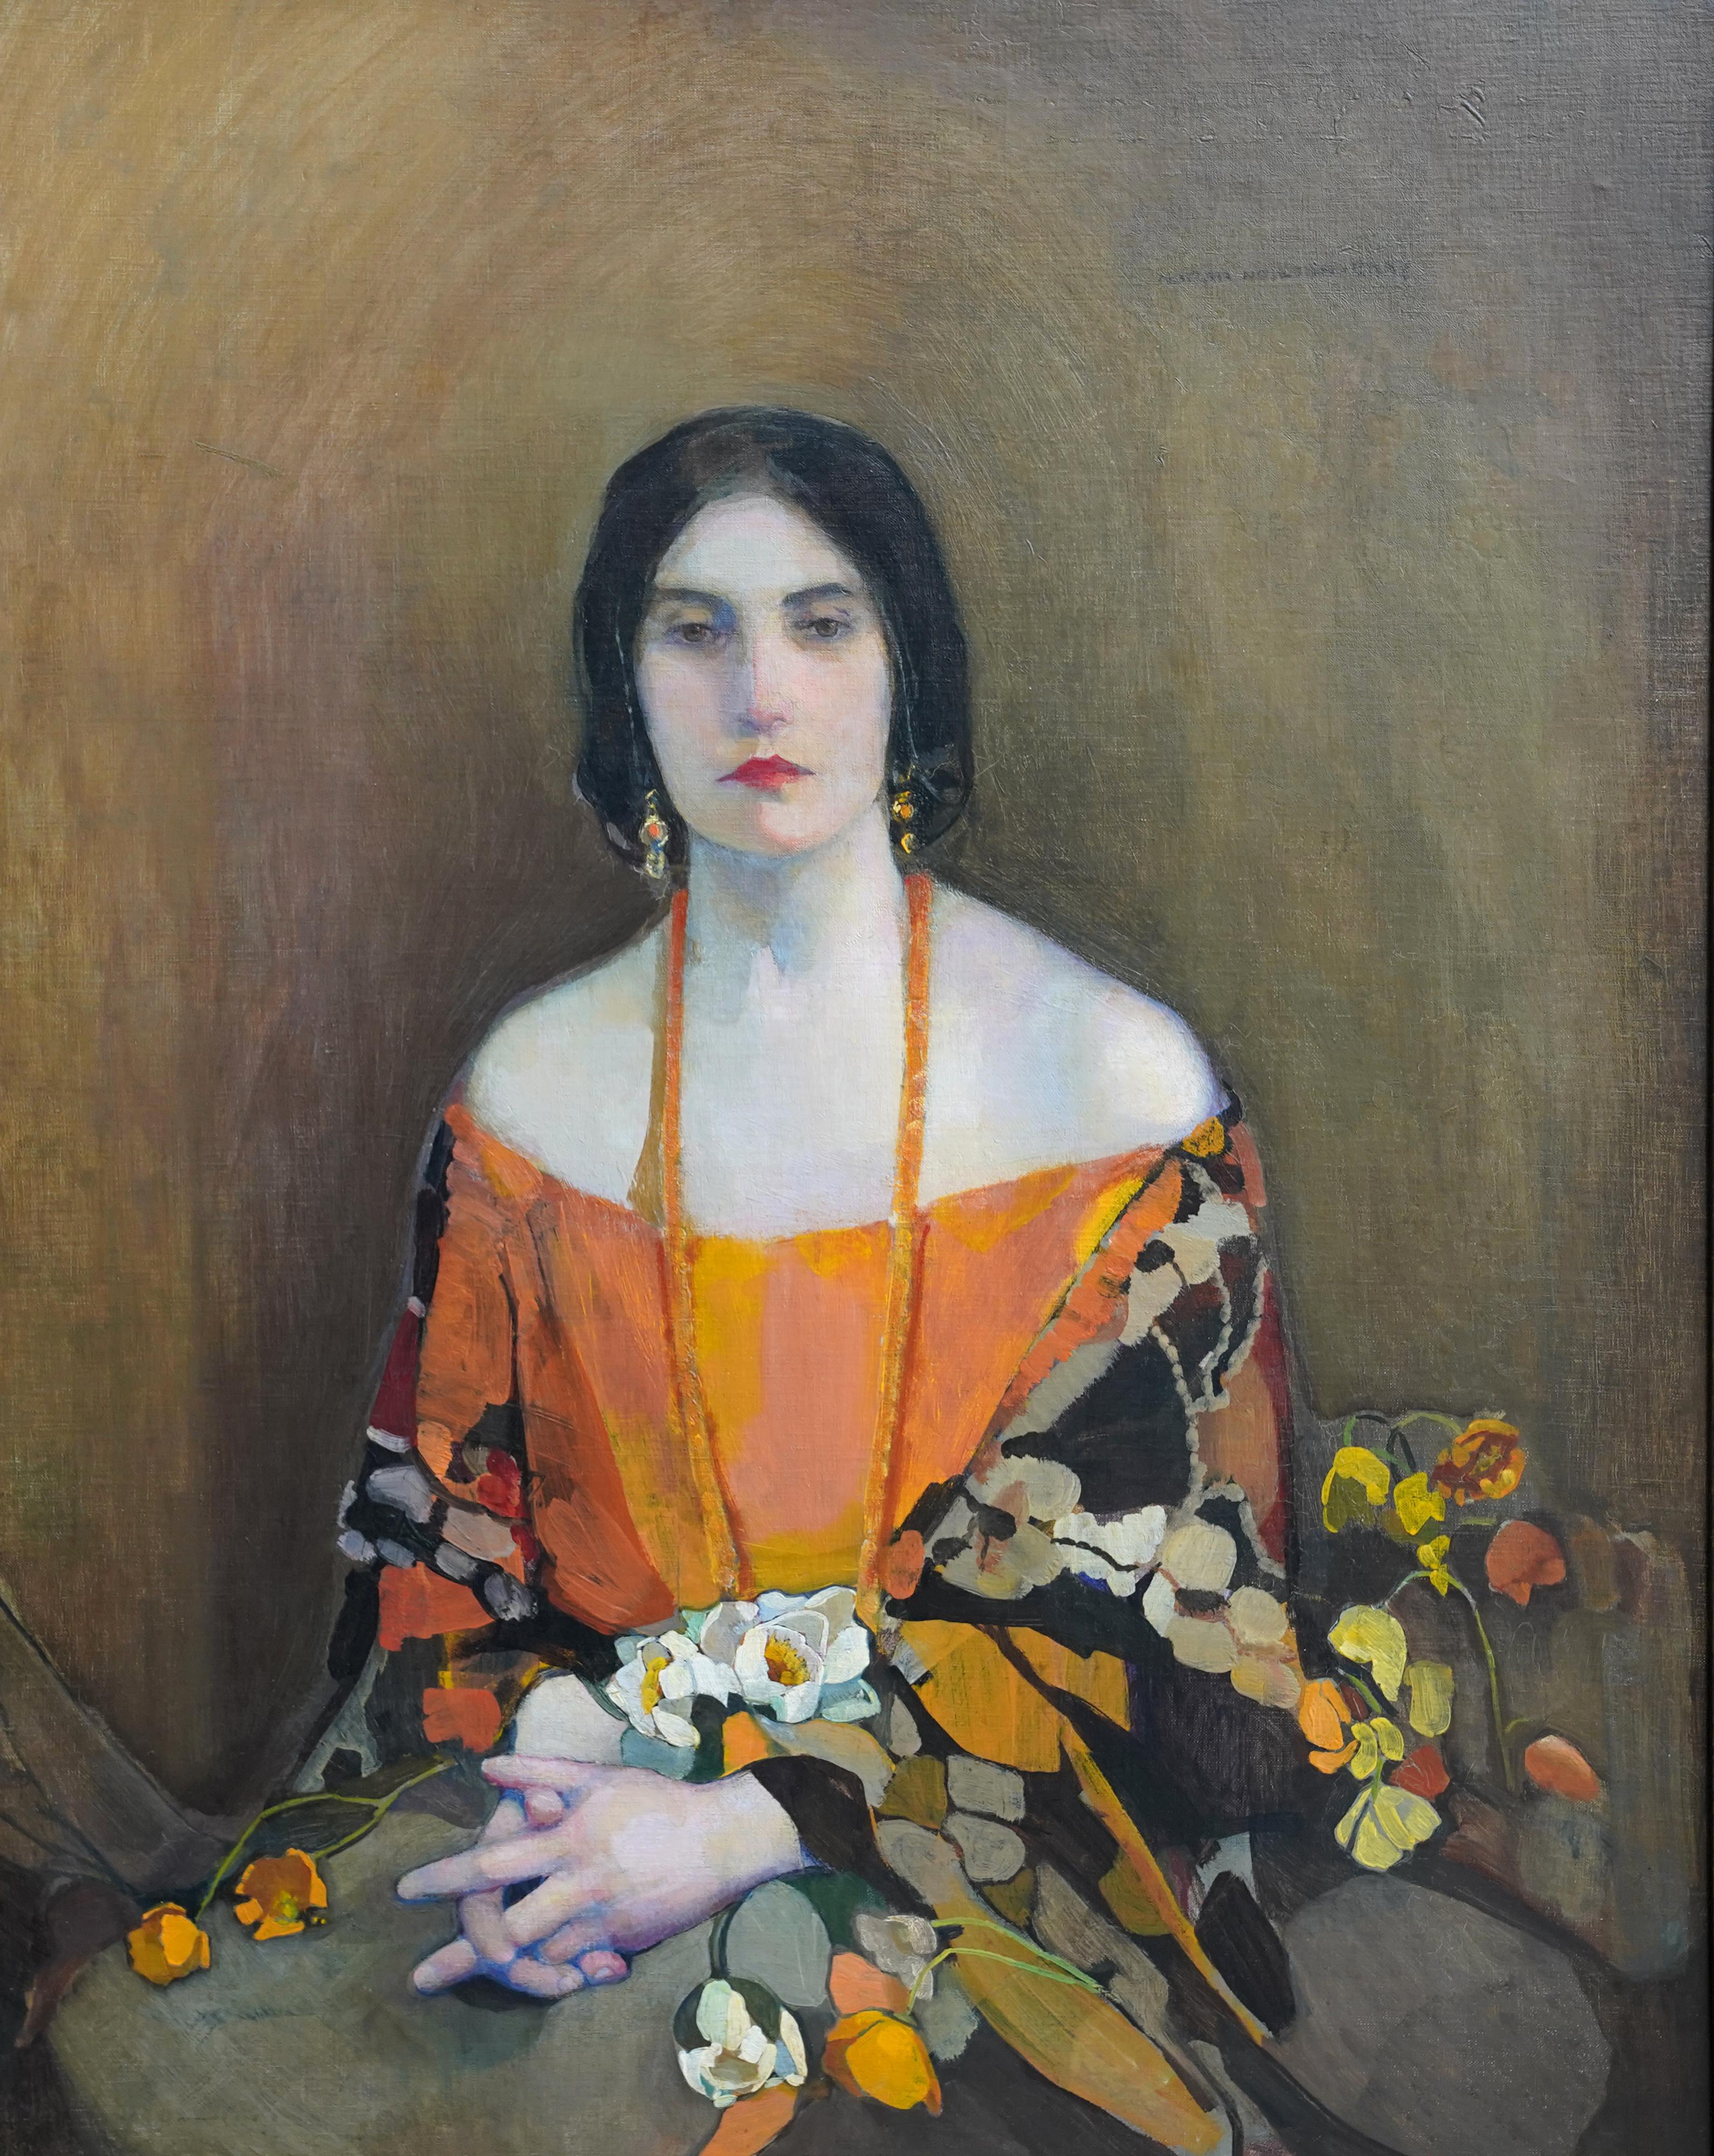 Exotic - Scottish 1920's exhibited 'Glasgow Girl' art portrait oil painting - Painting by Norah Neilson Gray